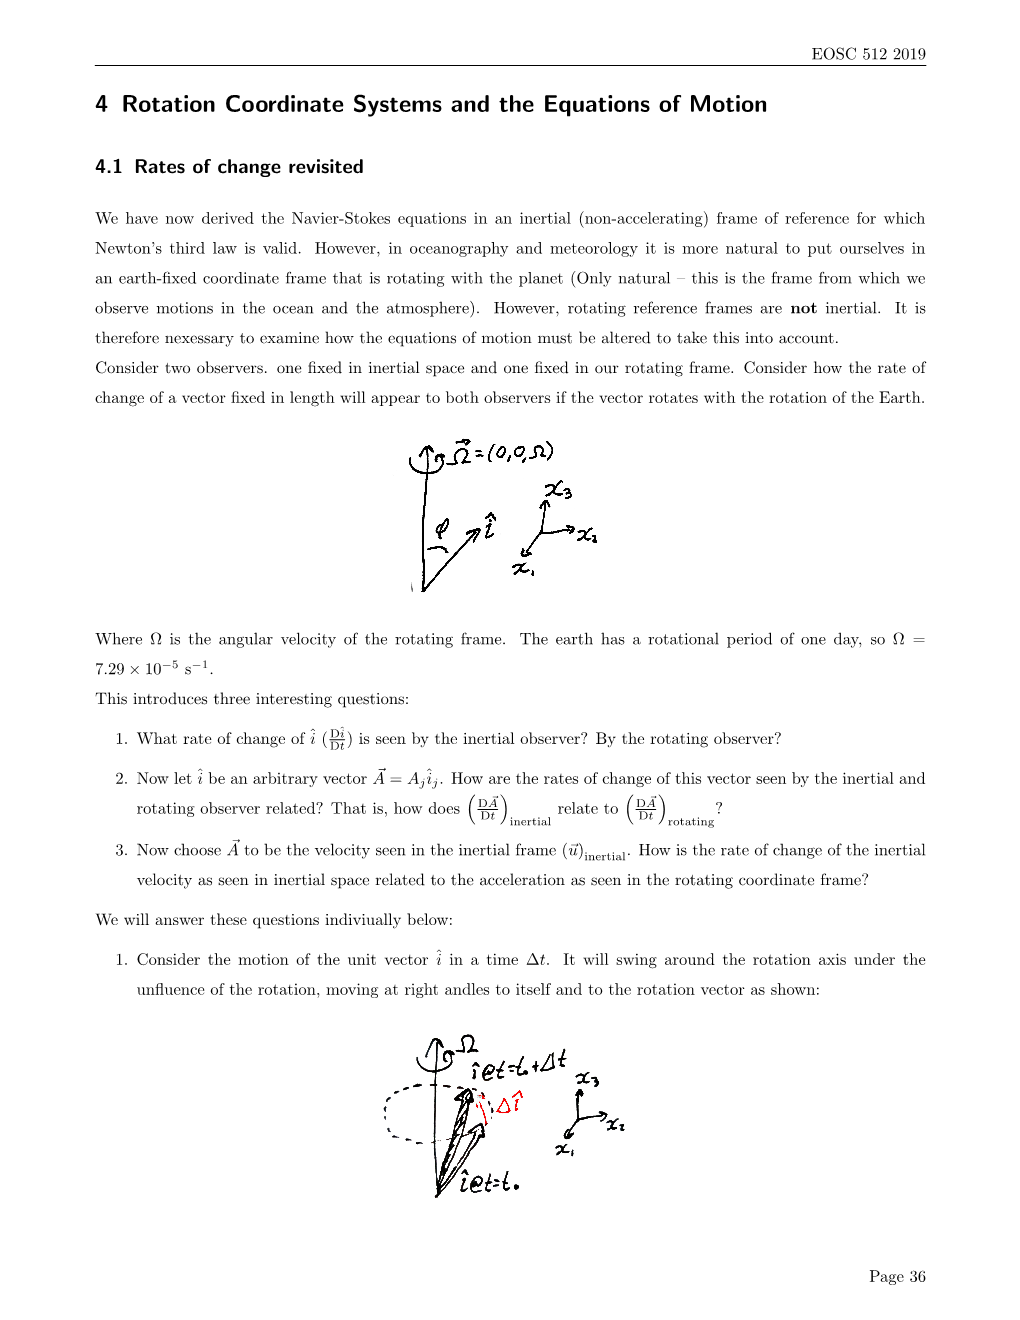 4 Rotation Coordinate Systems and the Equations of Motion